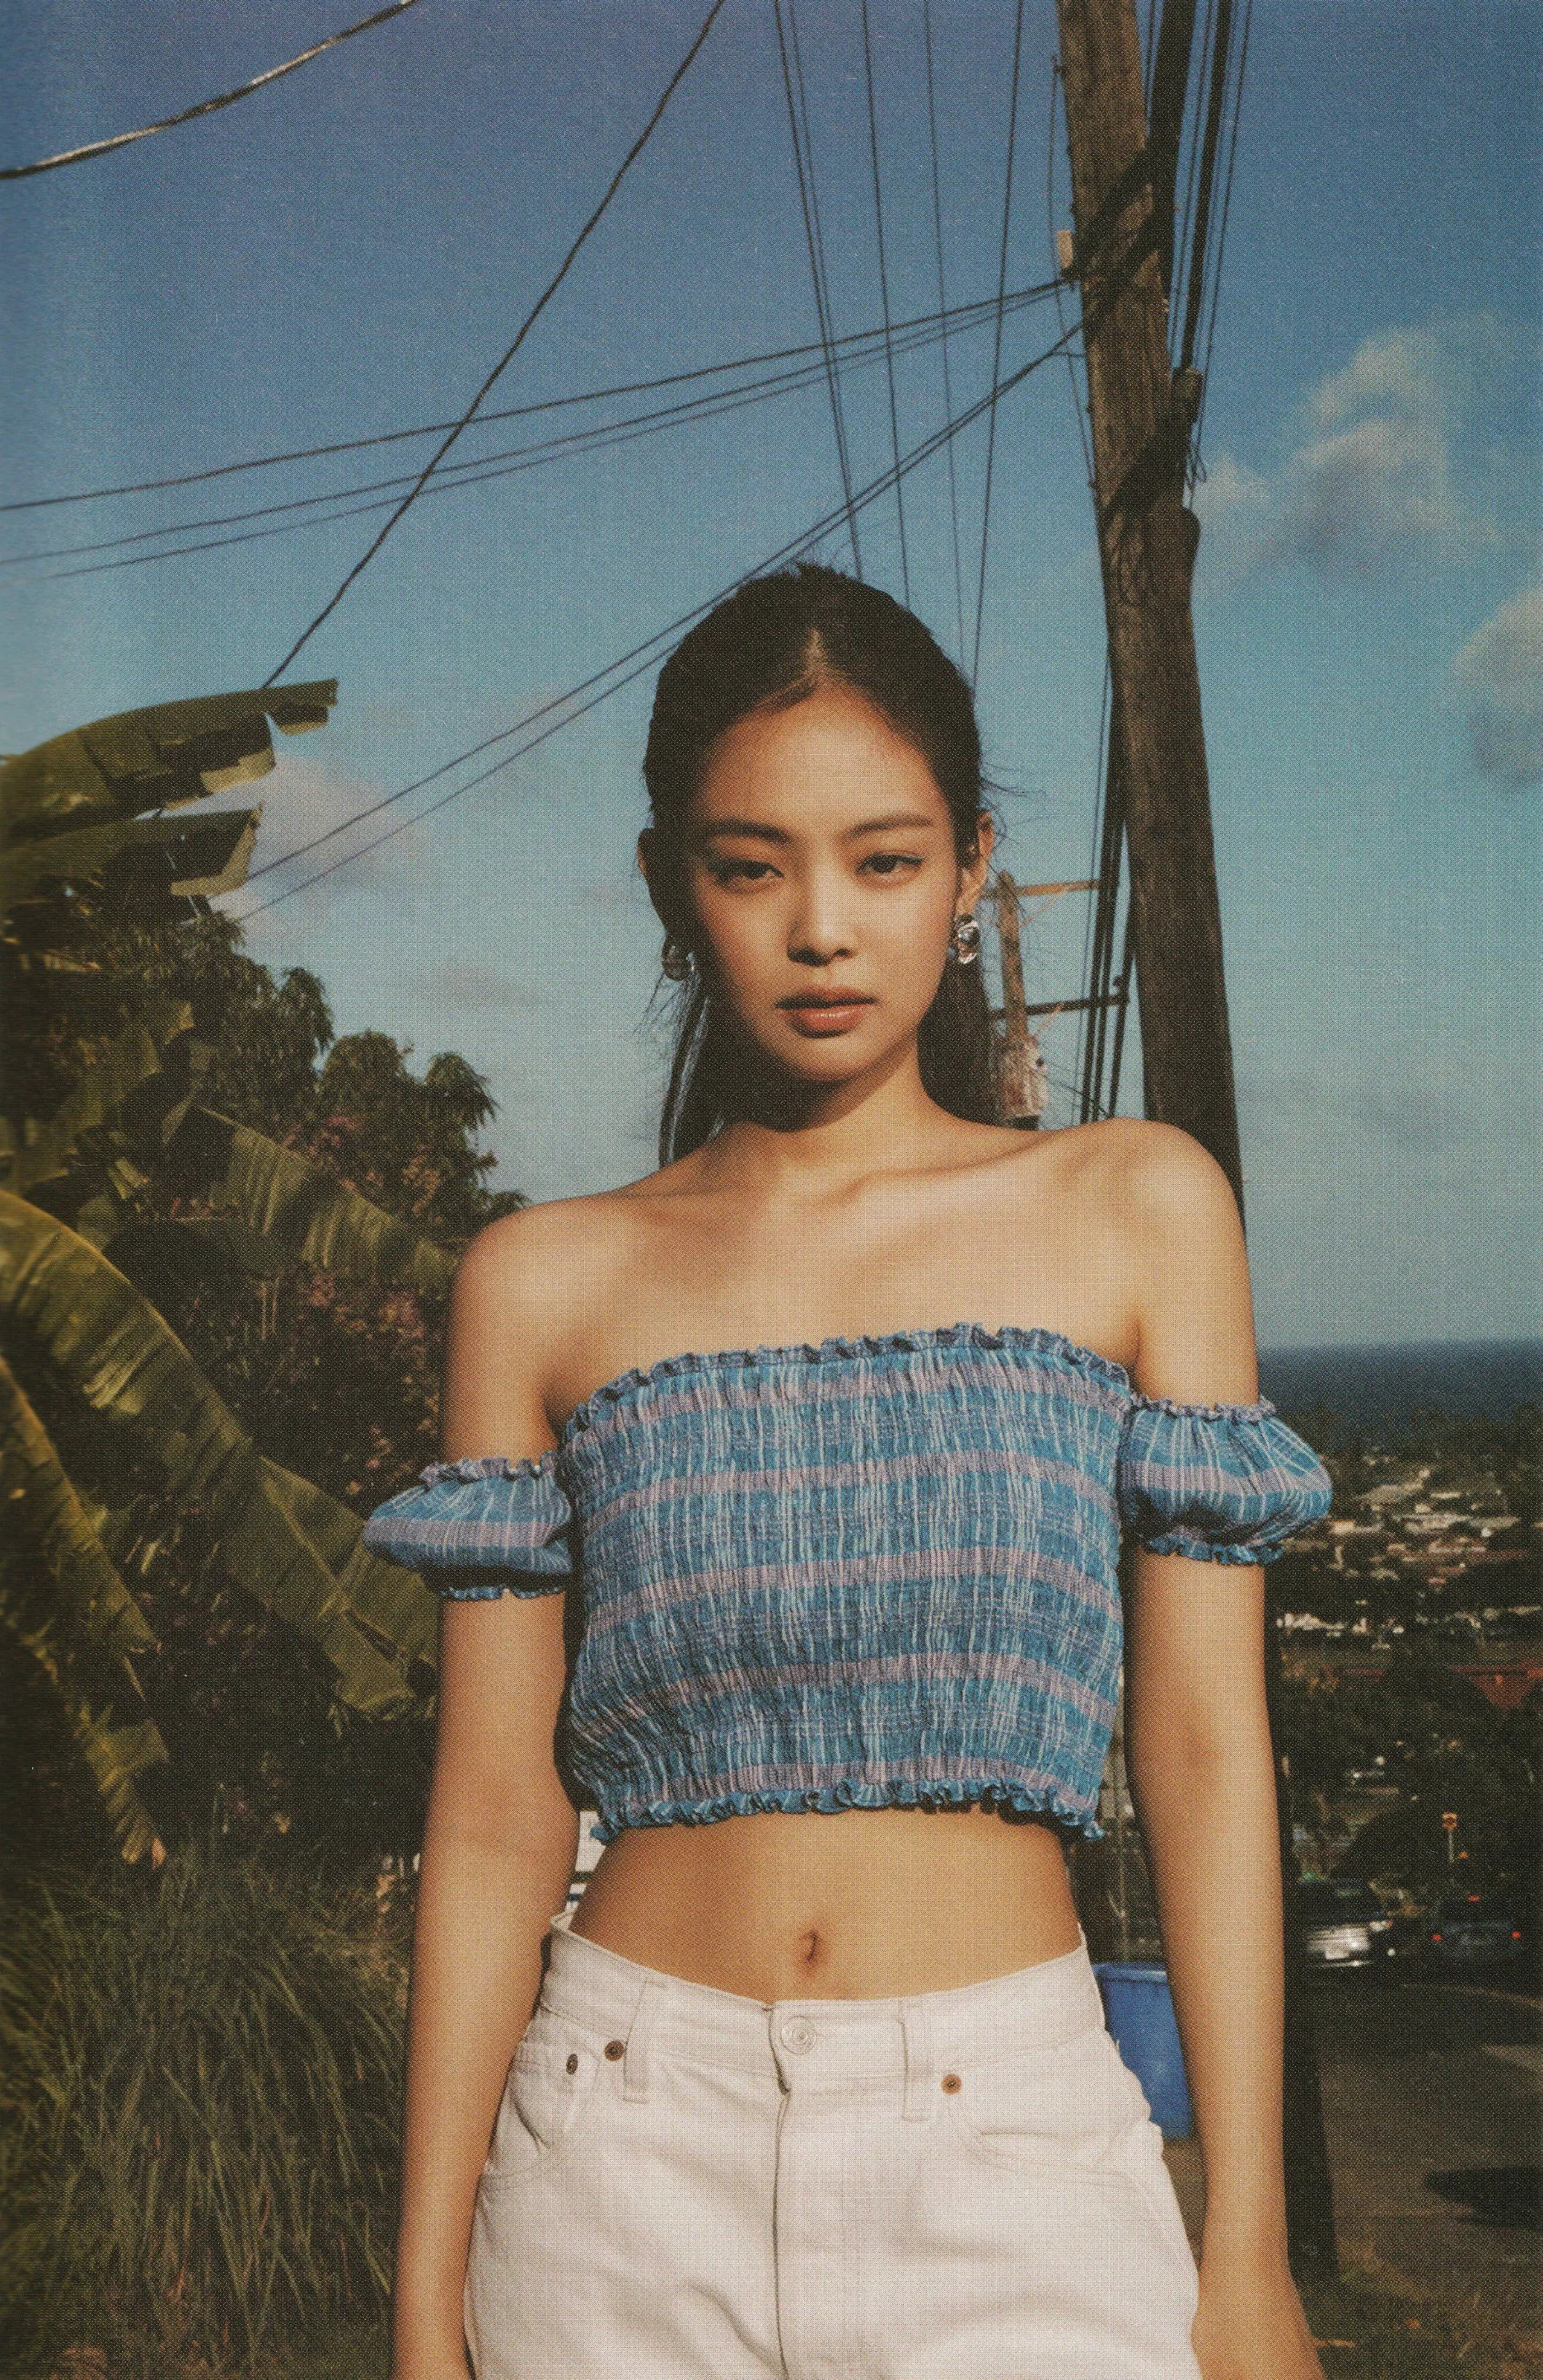 SCAN] 2019 BLACKPINK Summer Diary in Hawaii - Jennie | kpopping